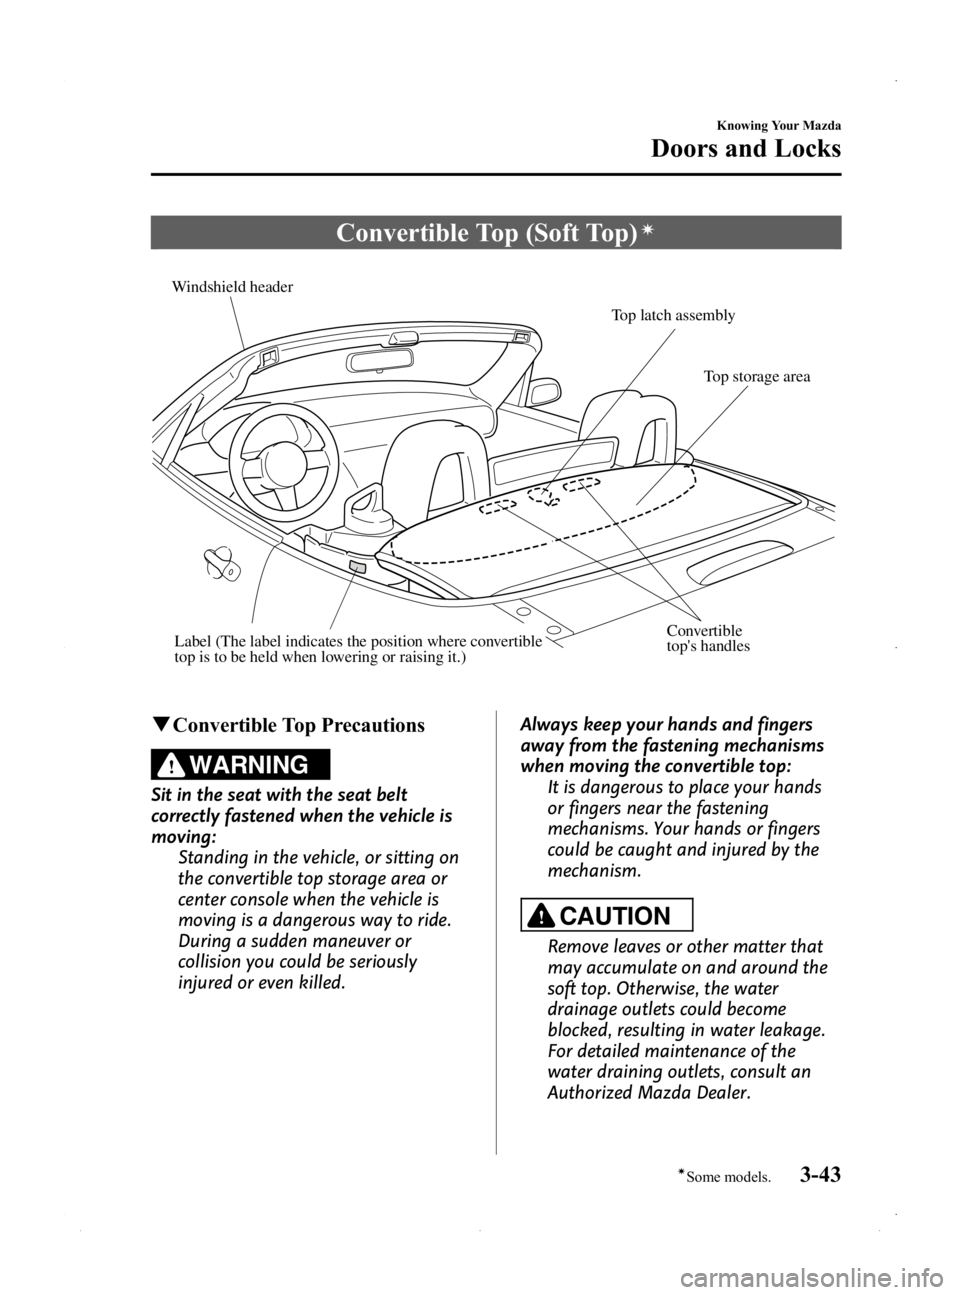 MAZDA MODEL MX-5 MIATA PRHT 2015  Owners Manual Black plate (97,1)
Convertible Top (Soft Top)í
Windshield headerTop latch assembly
Top storage area
Convertible 
tops handlesLabel (The label indicates the position where convertible 
top is to be h